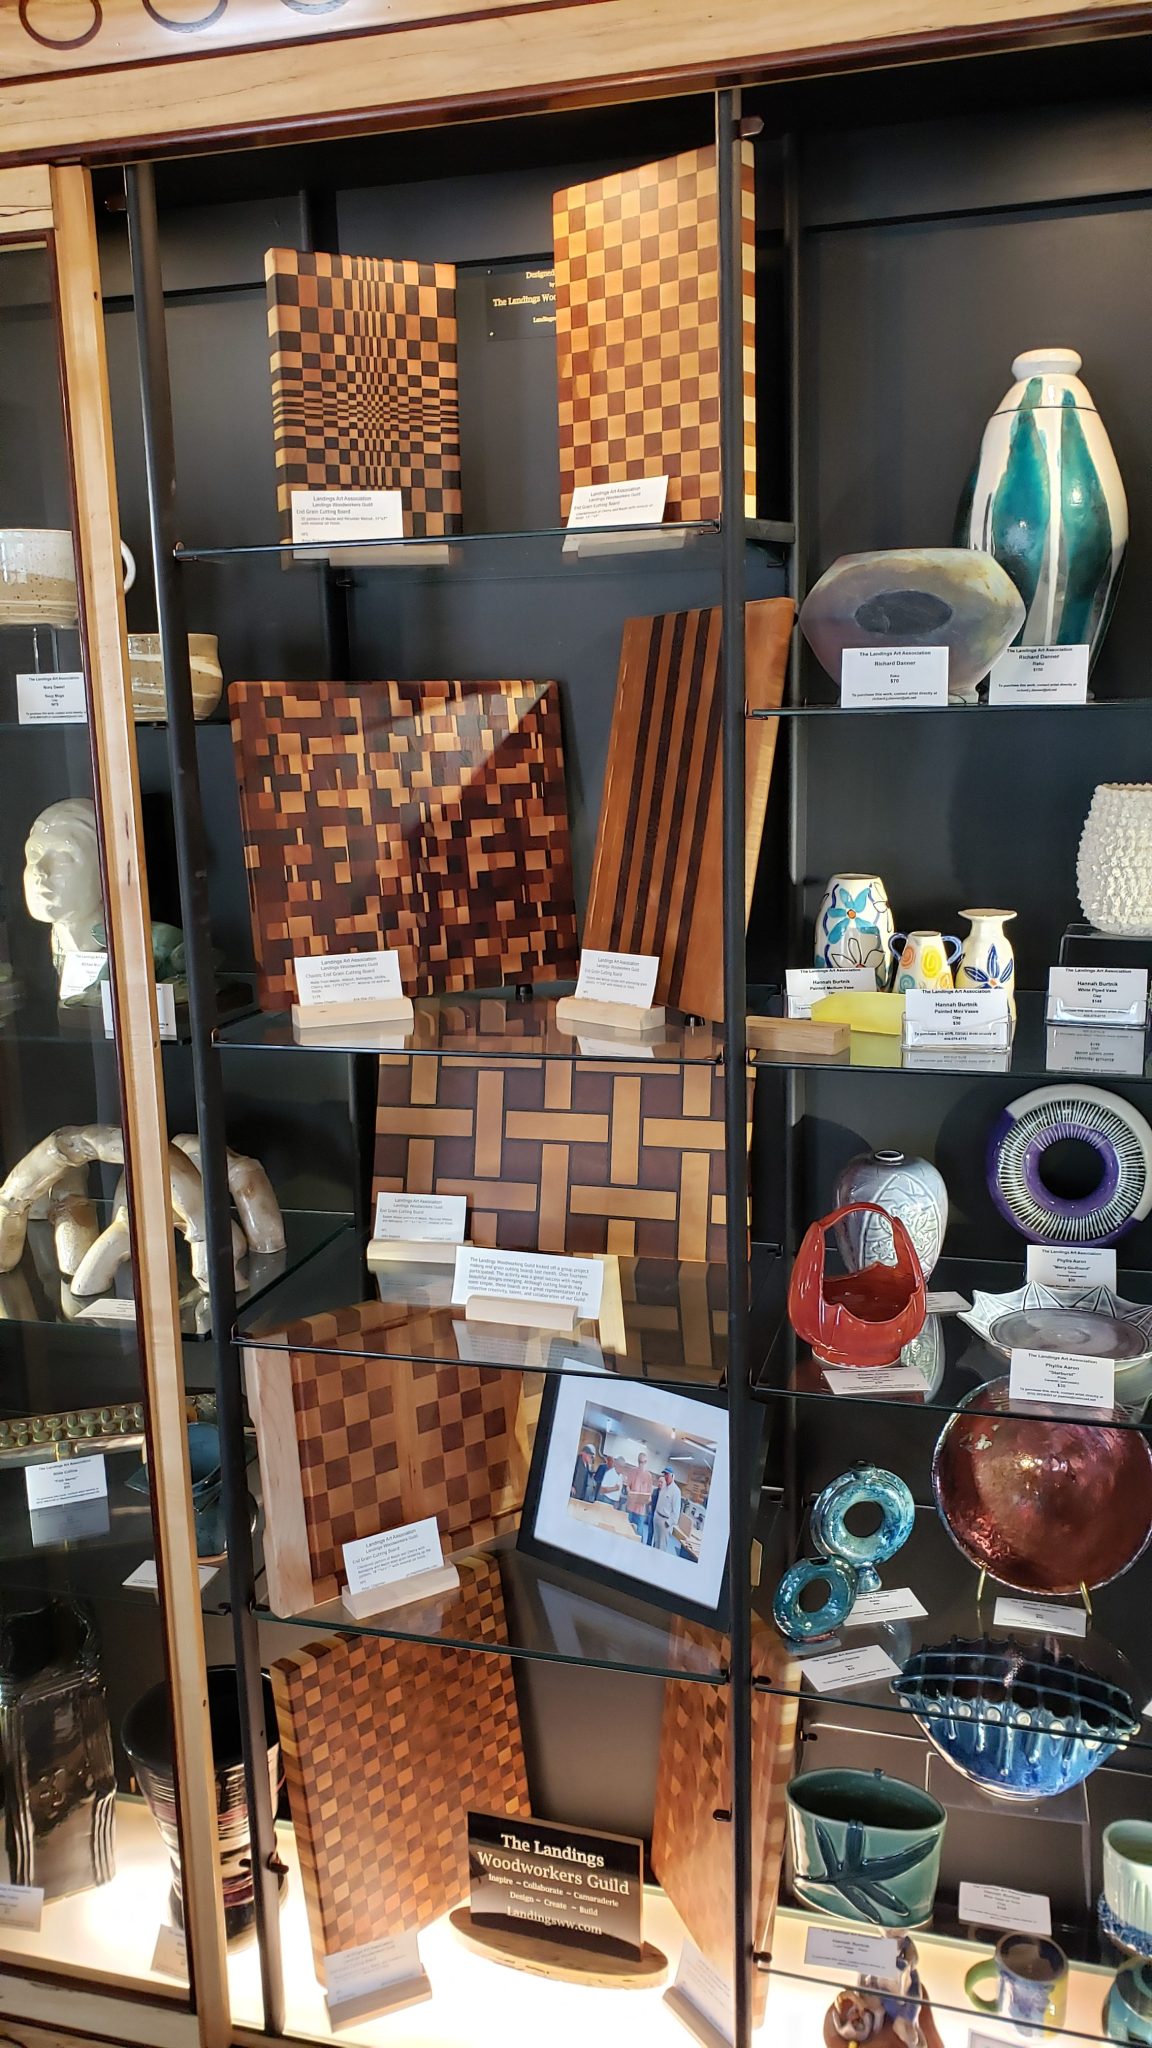 The LWG display cabinet full of cutting boards from the John Weaver led end grain cutting board project.